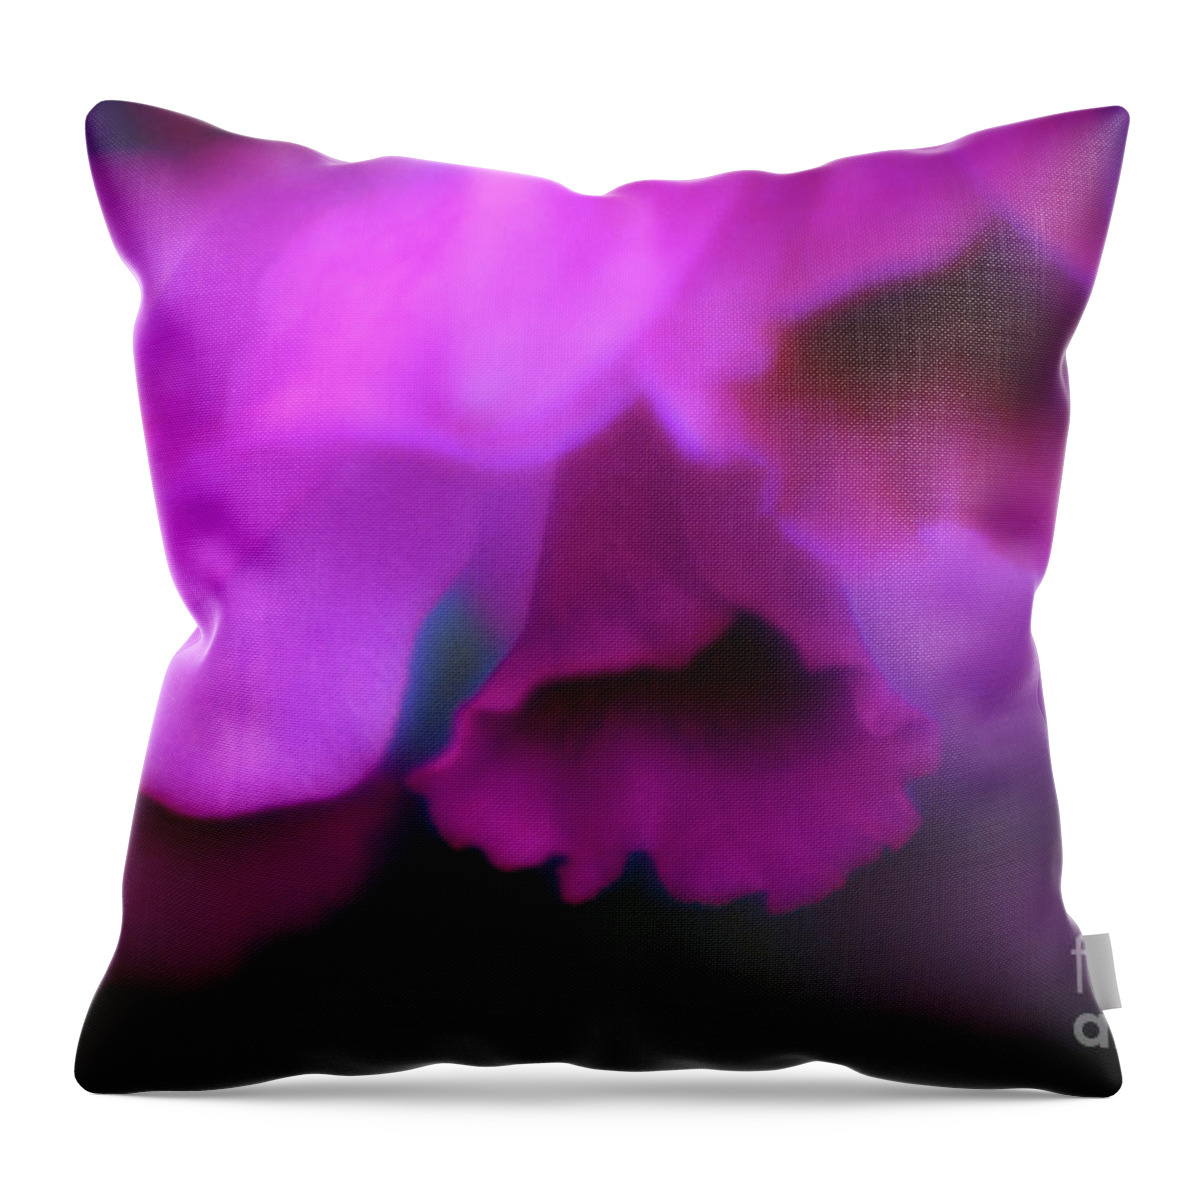 Anther Throw Pillow featuring the photograph Hanging Purple Tropical Flowers Up Close- Kauai- Hawaii by Rick Bures